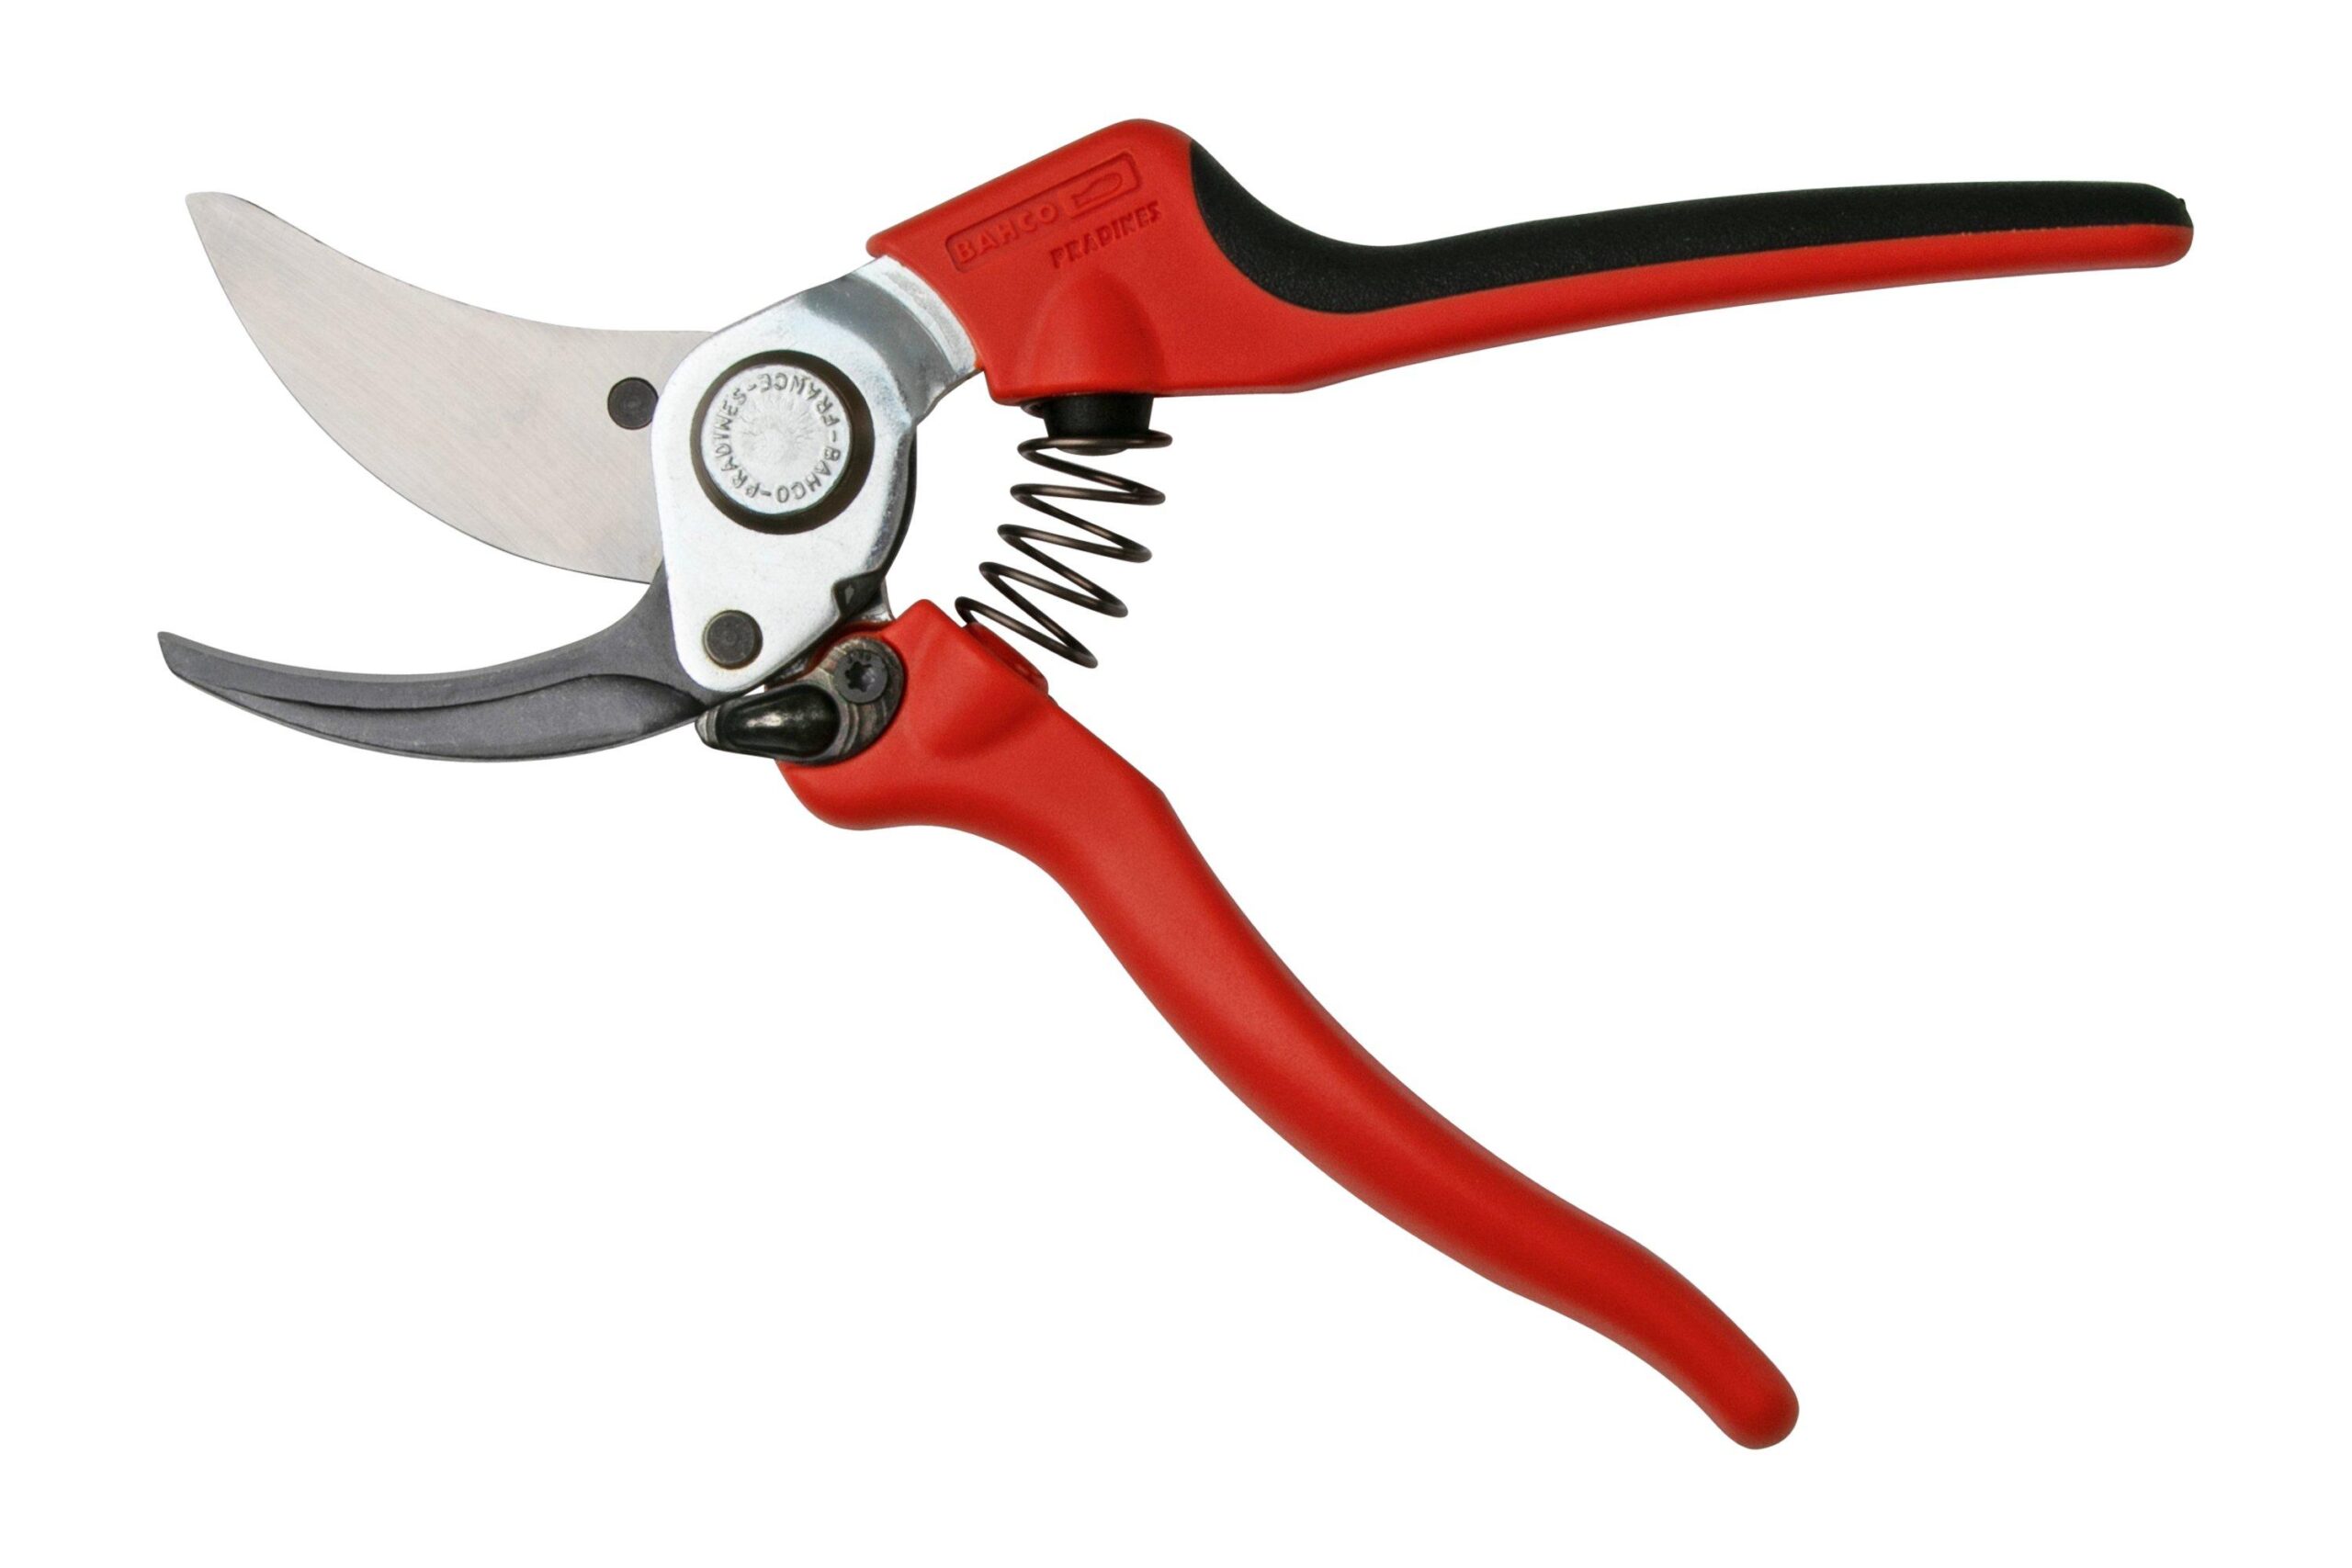 What is the use of pruning shears?